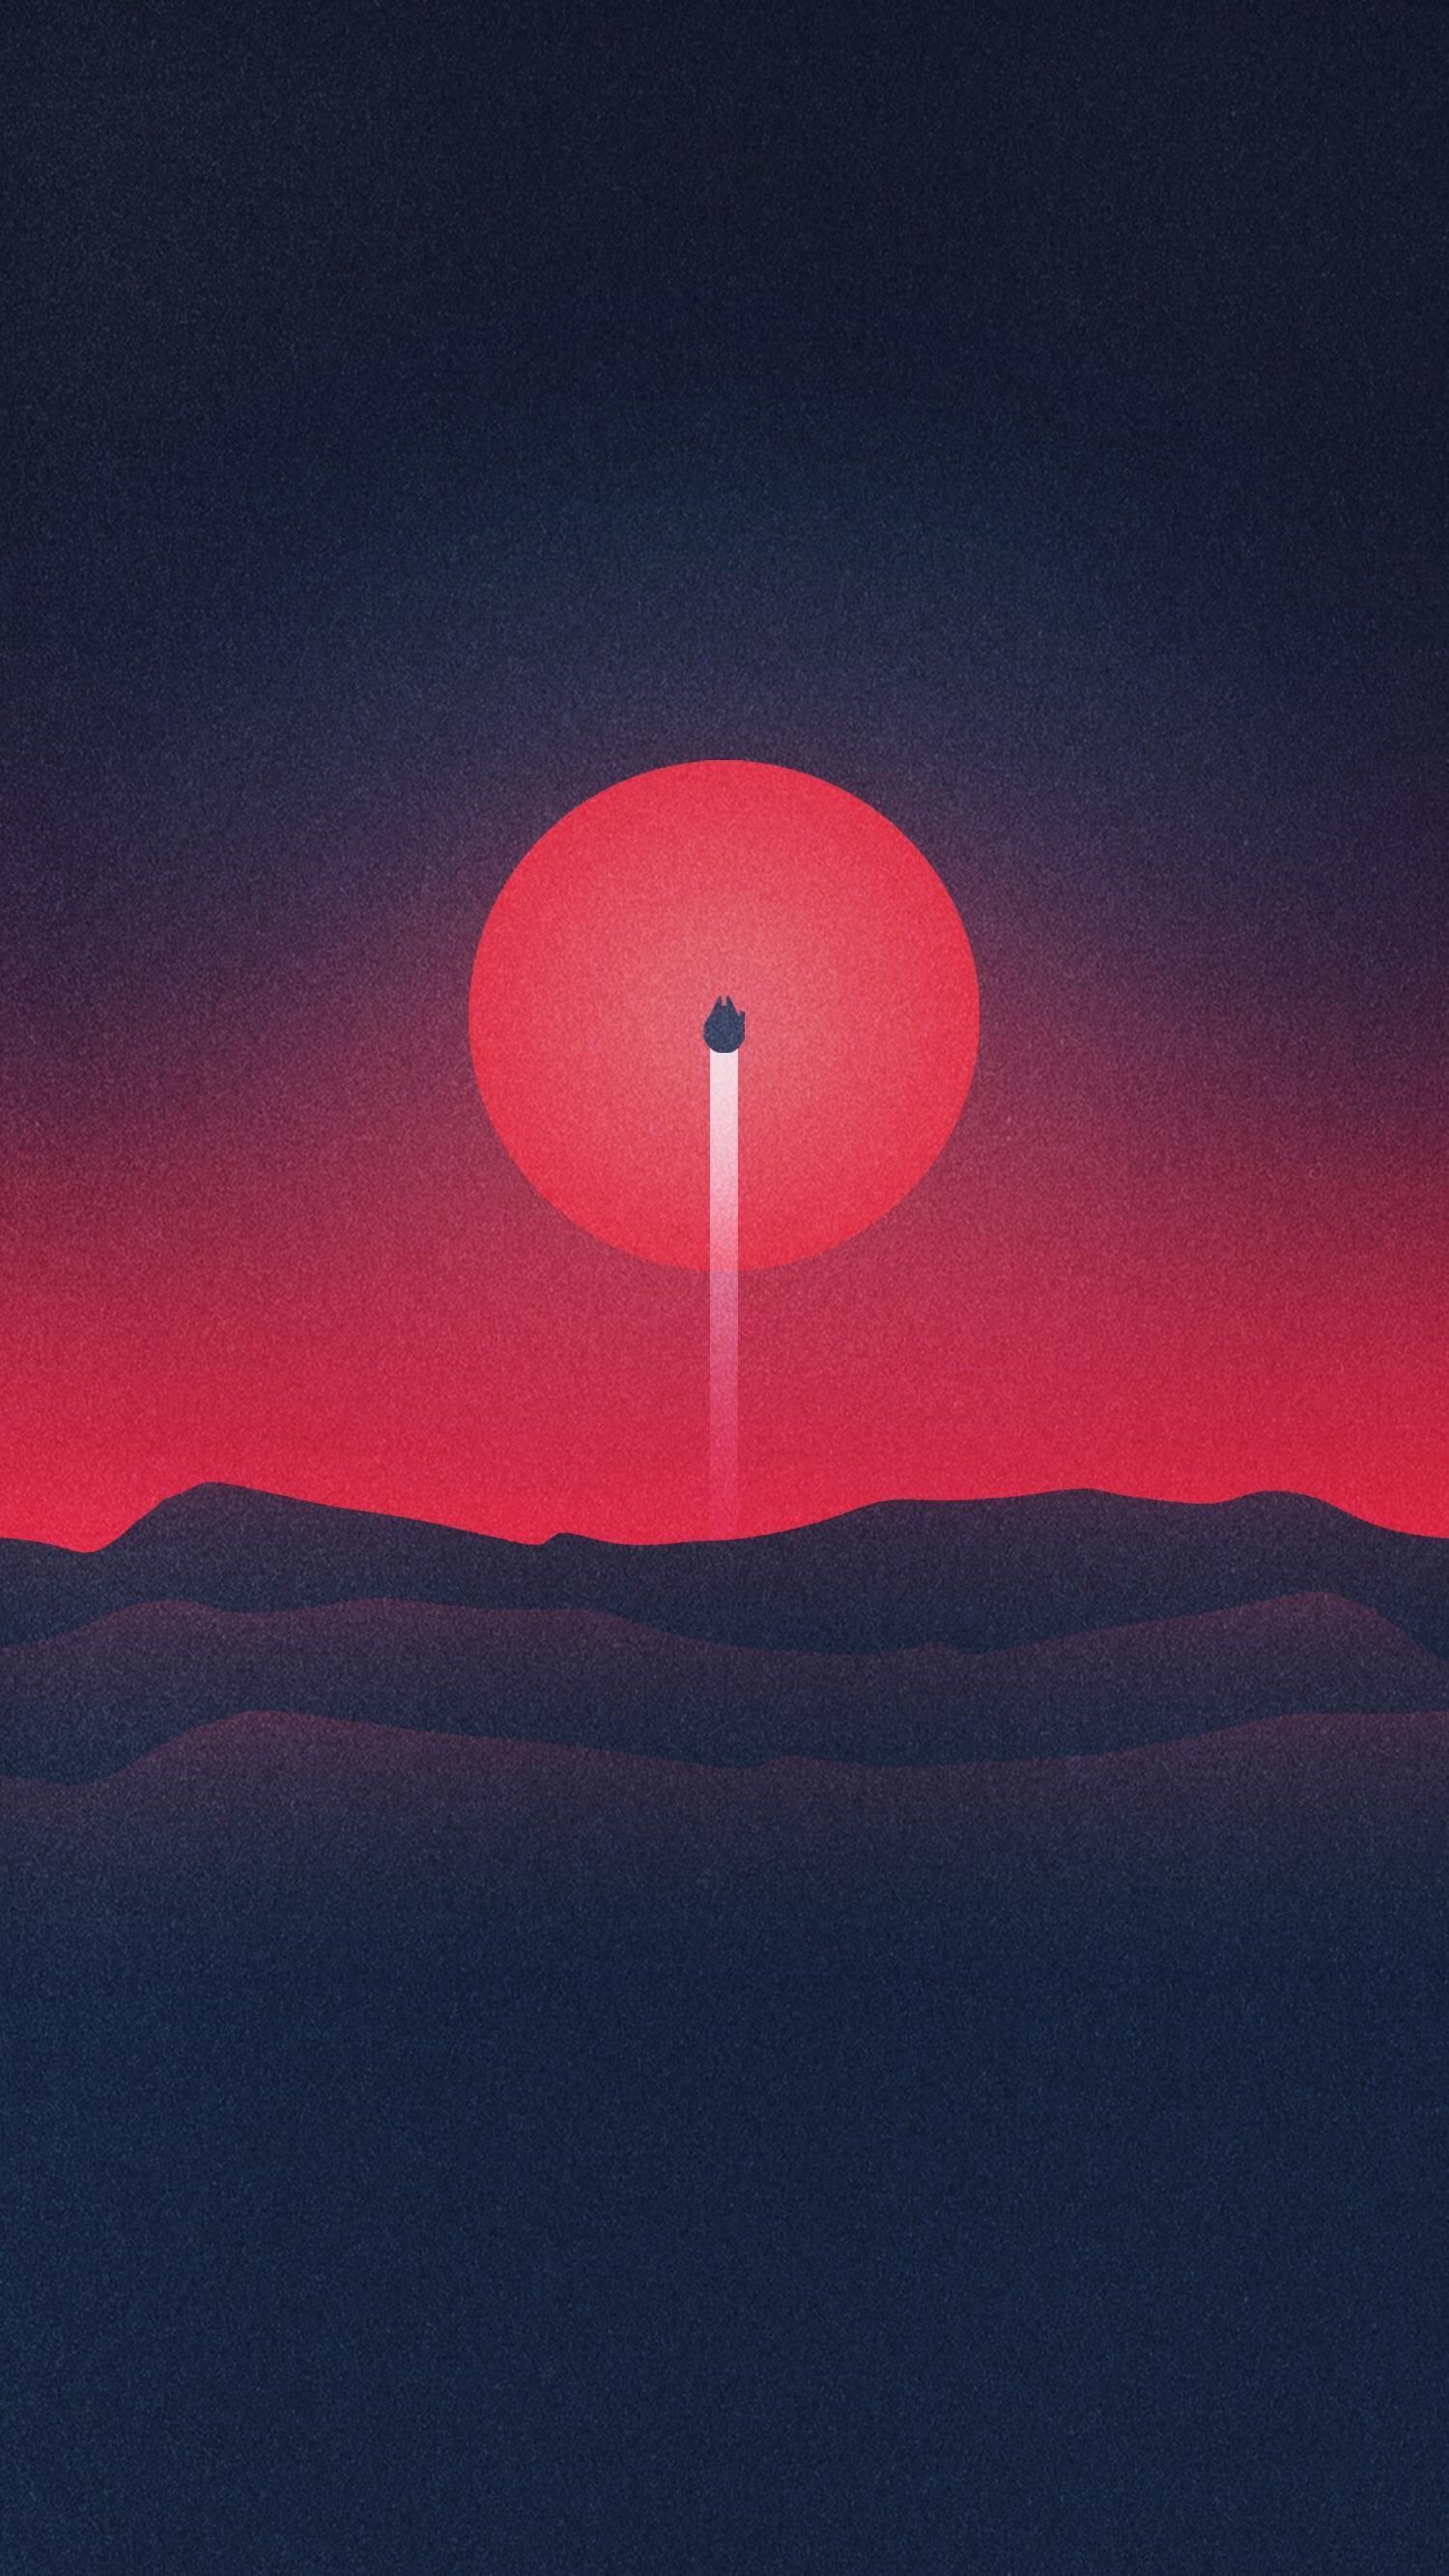 A red sun setting over the desert - Star Wars